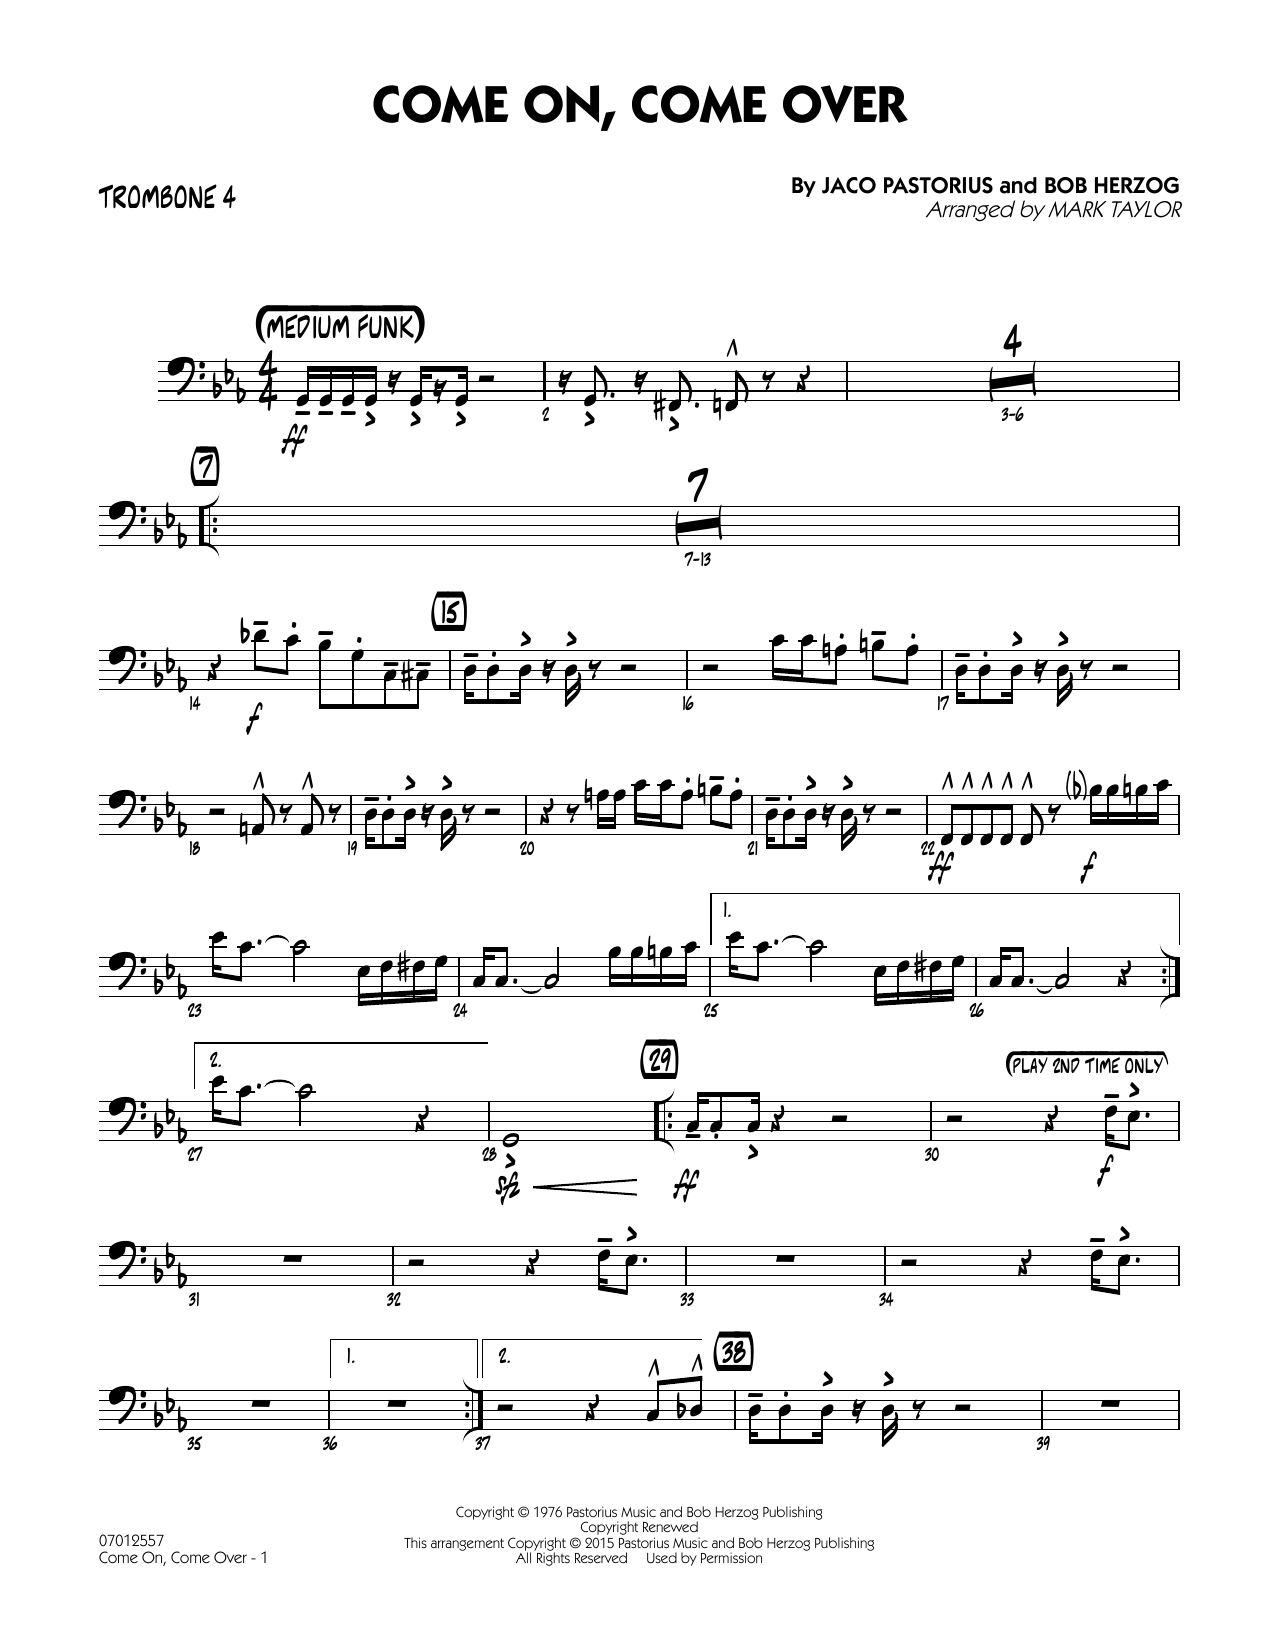 Mark Taylor Come On, Come Over - Trombone 4 sheet music notes and chords. Download Printable PDF.